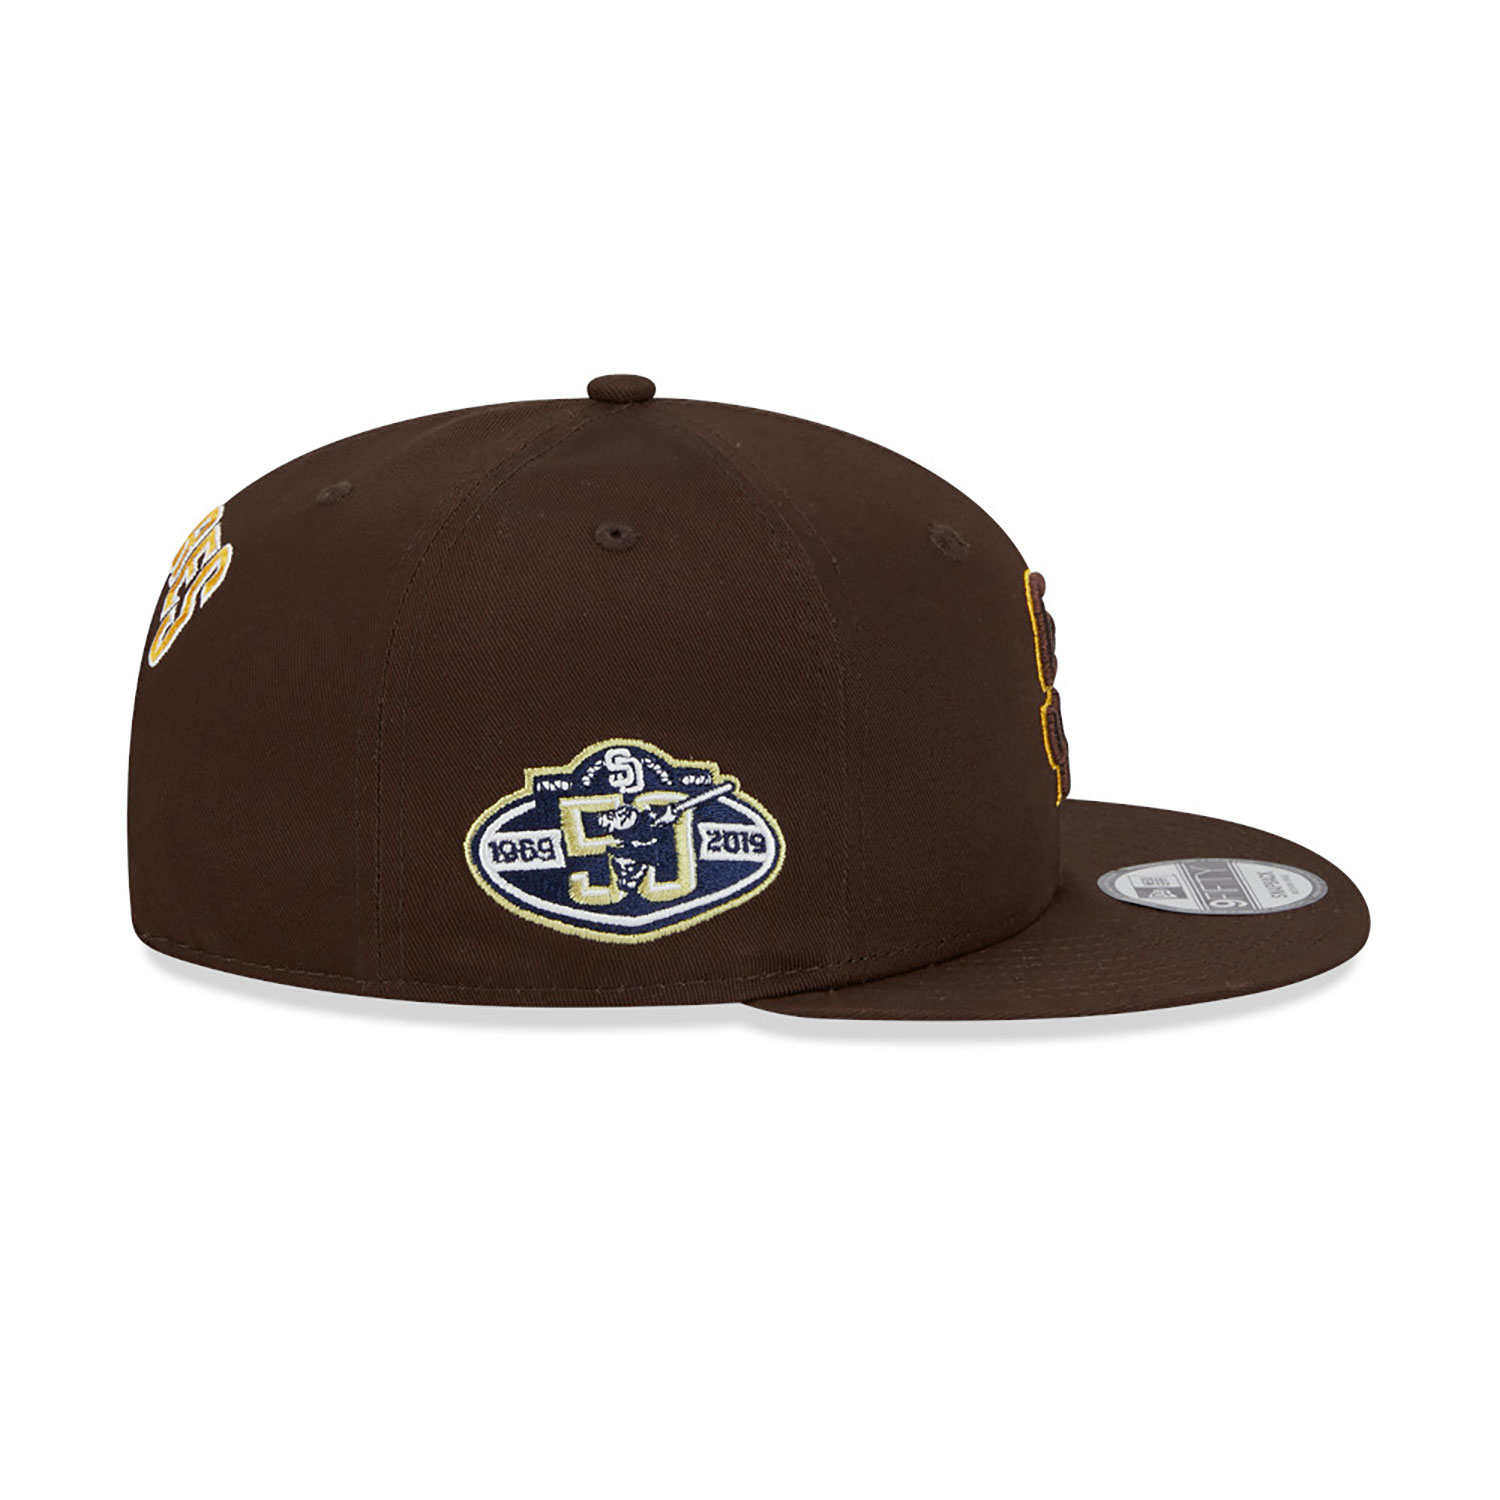 San Diego Padres Side Patch Brown 9FIFTY Snapback Cap